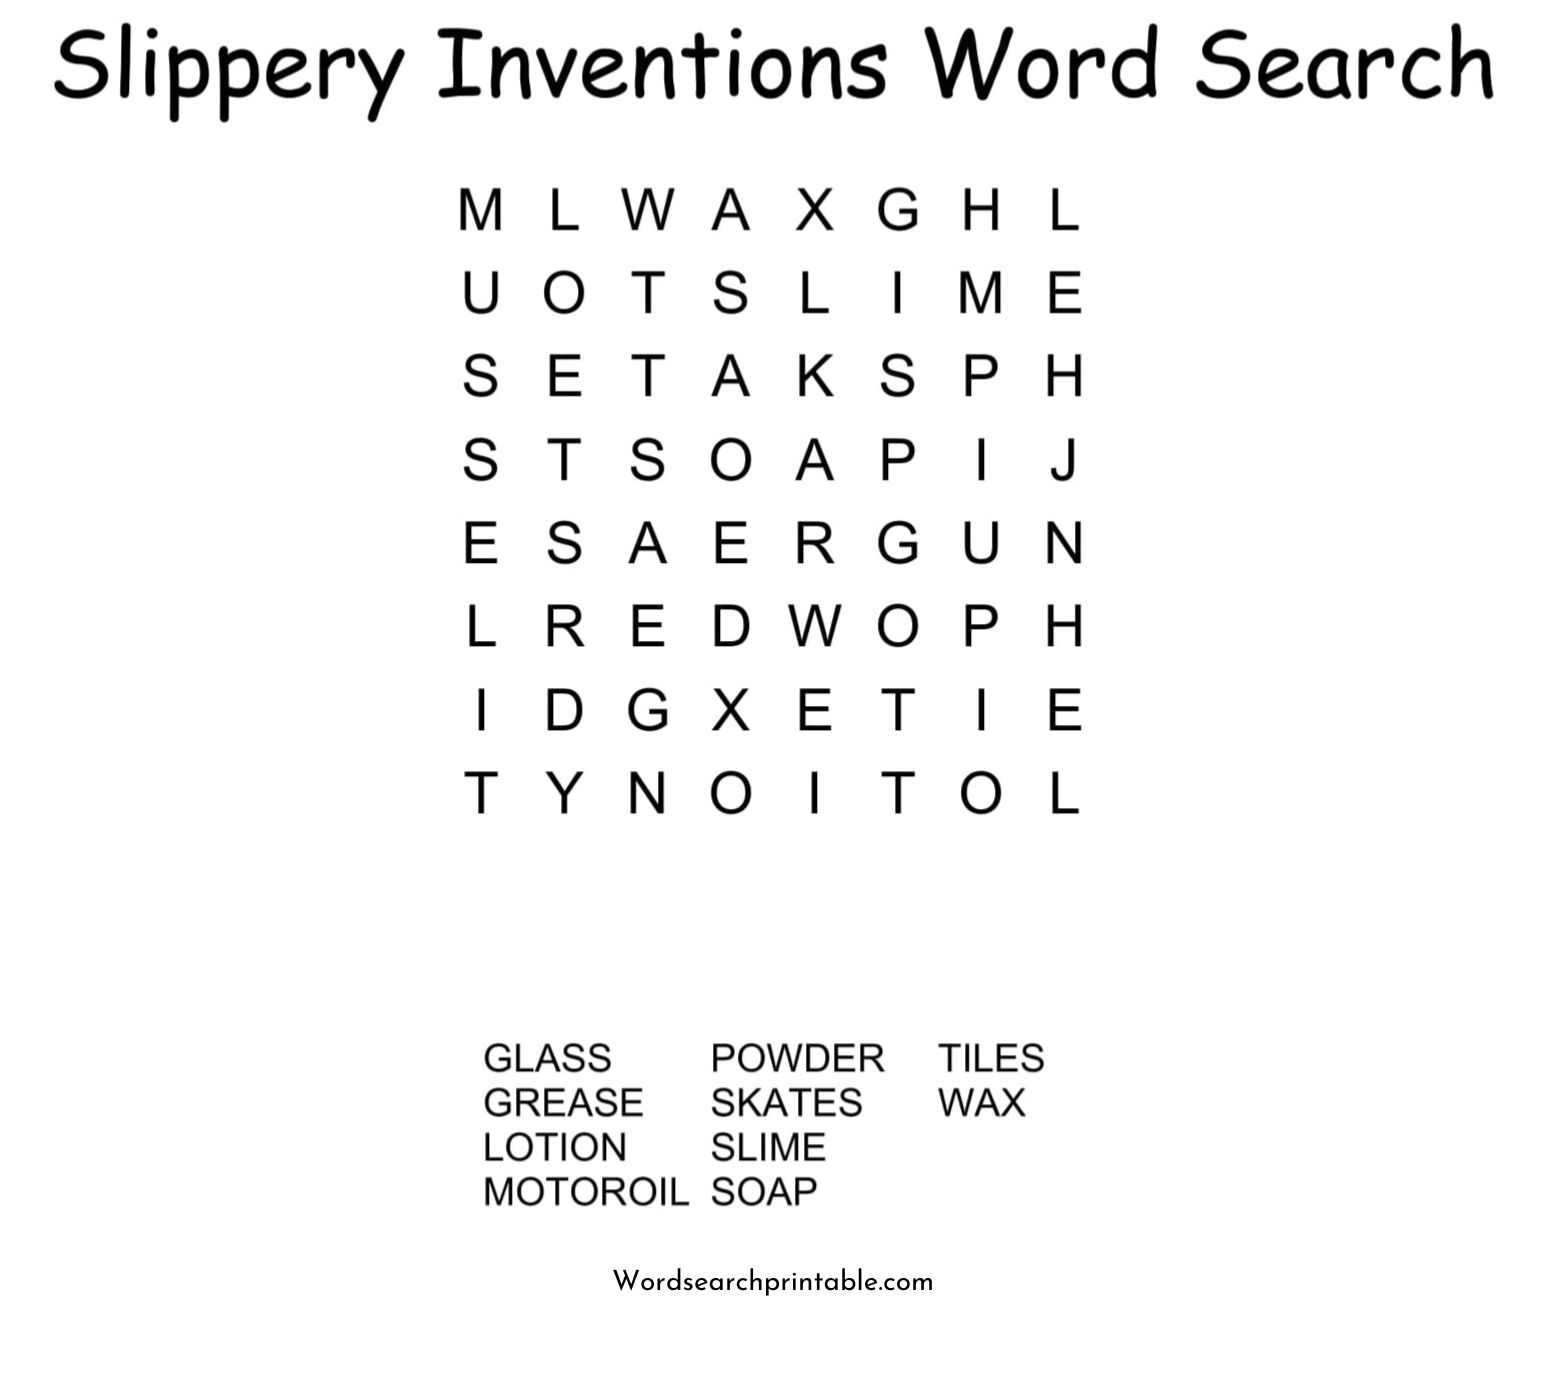 slippery inventions word search puzzle